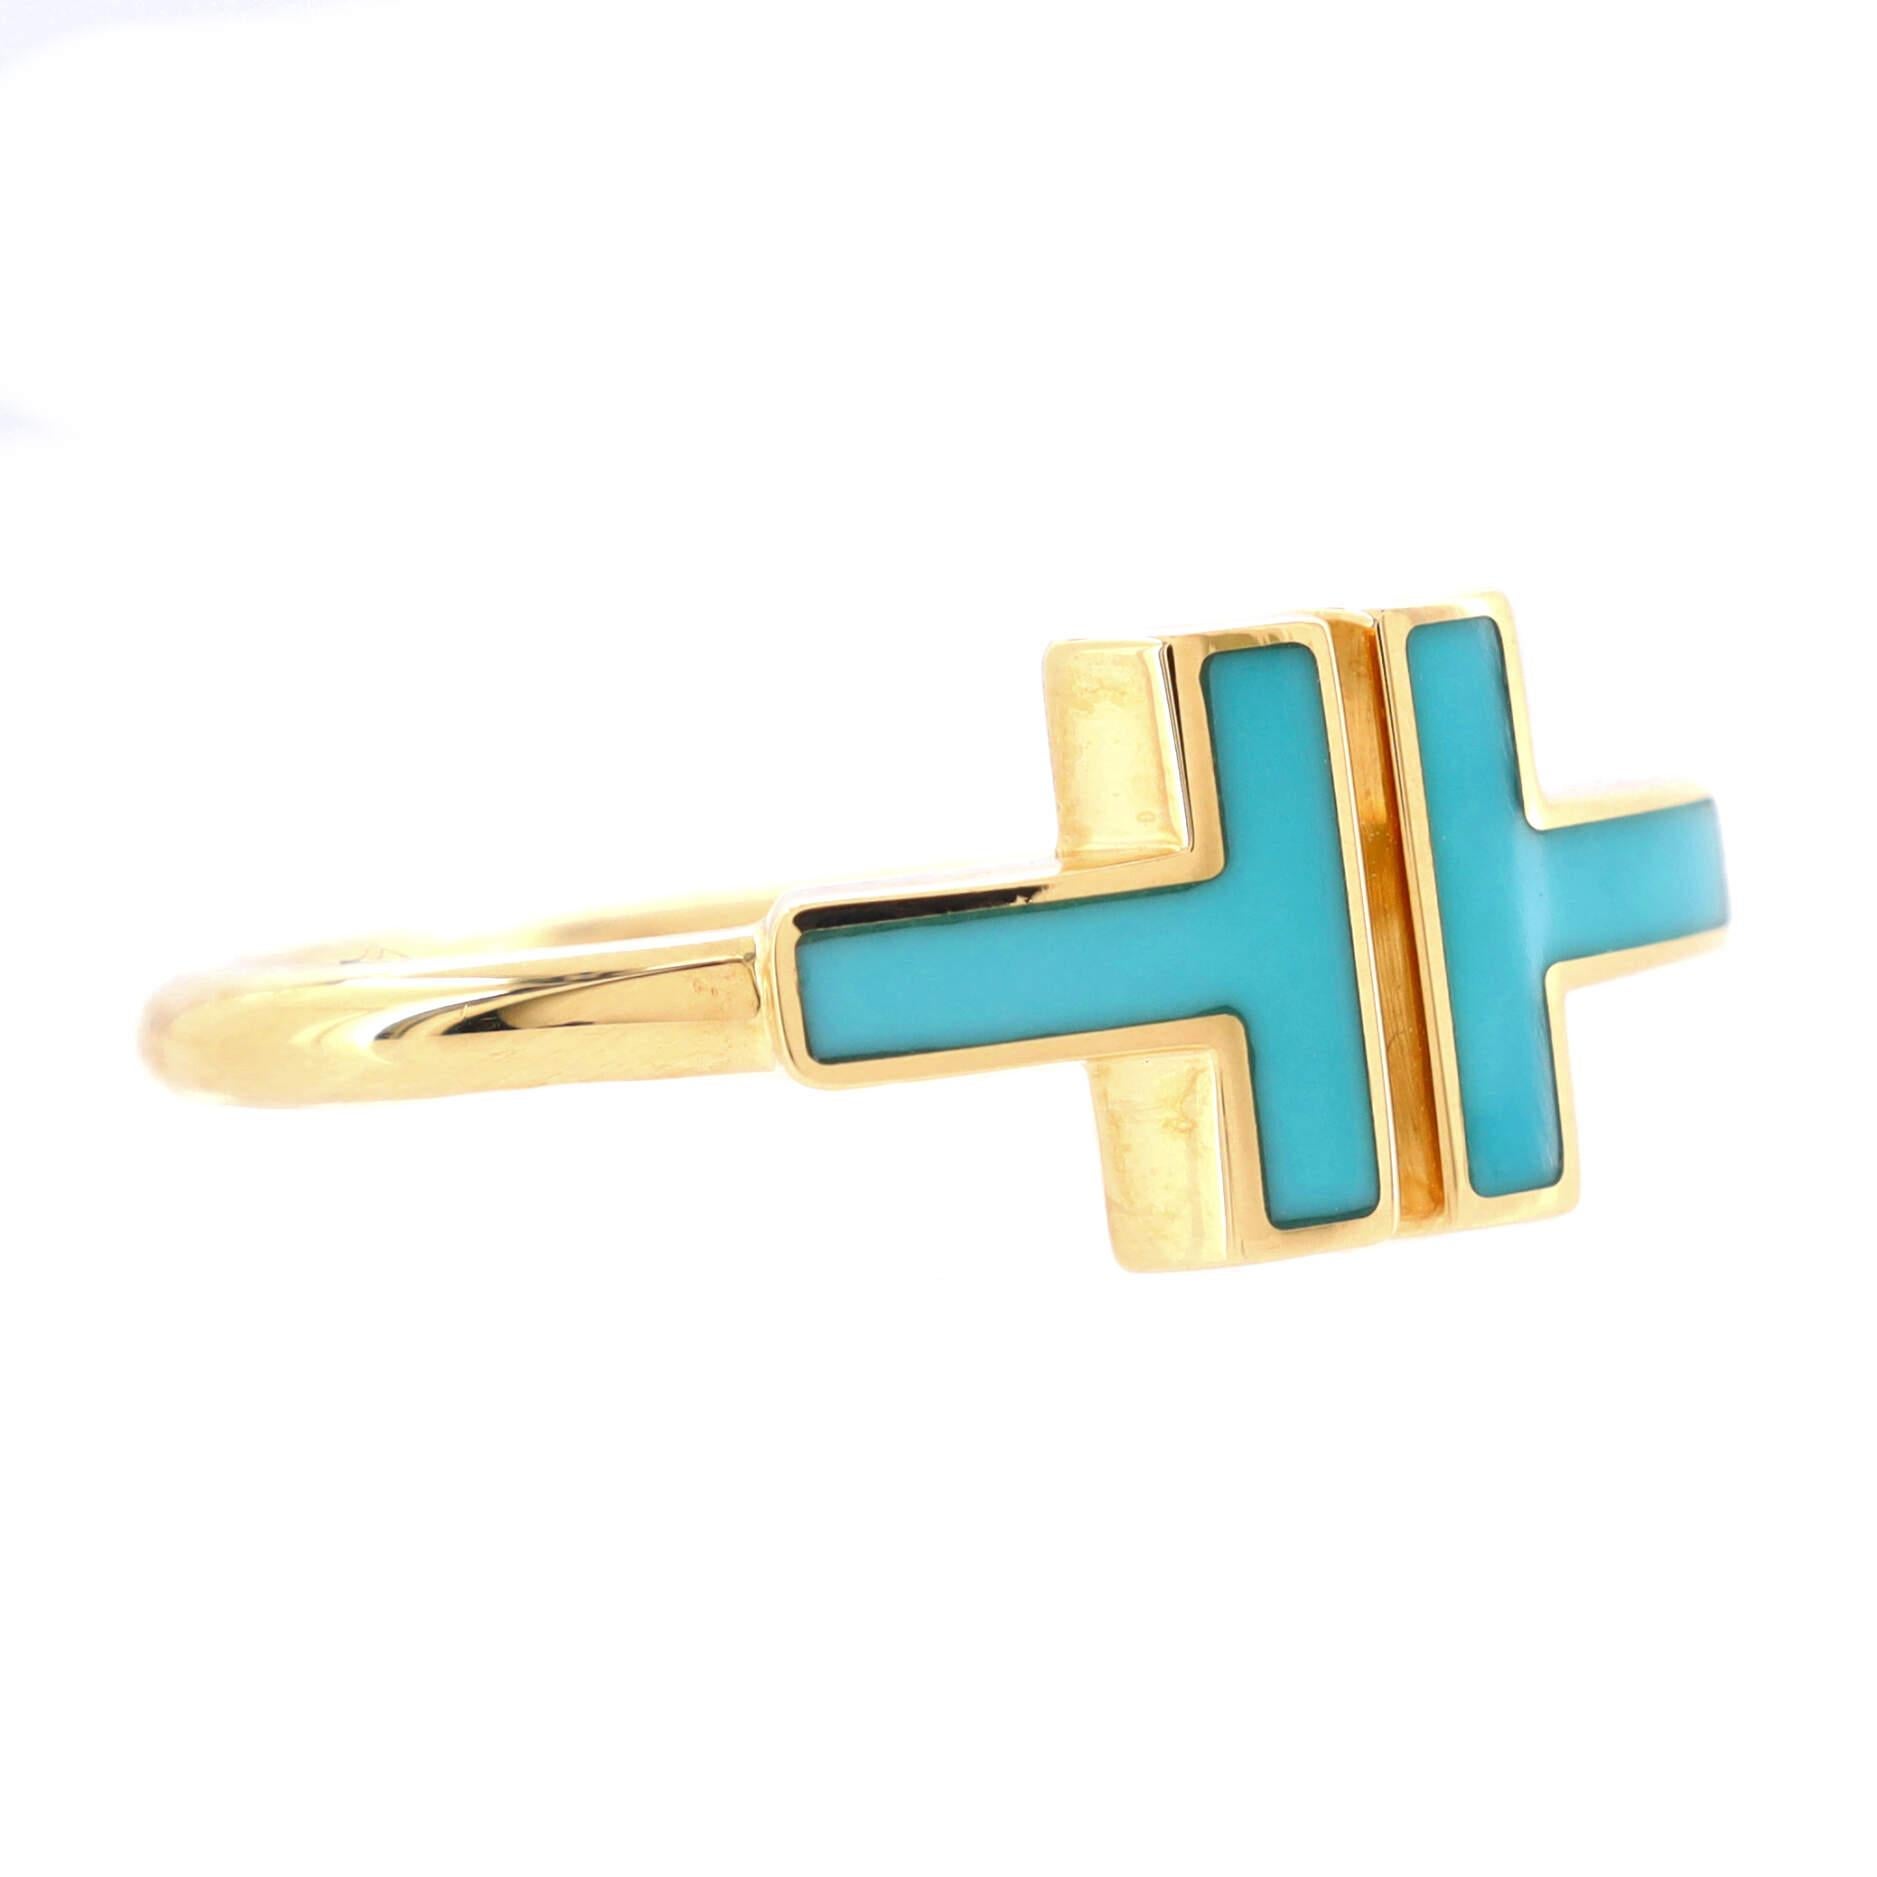 Condition: Very good. Moderate wear throughout.
Accessories: No Accessories
Measurements: Size: 6.75 - 54, Width: 1.95 mm
Designer: Tiffany & Co.
Model: T Wire Ring 18K Yellow Gold with Turquoise
Exterior Color: Yellow Gold
Item Number: 189914/421